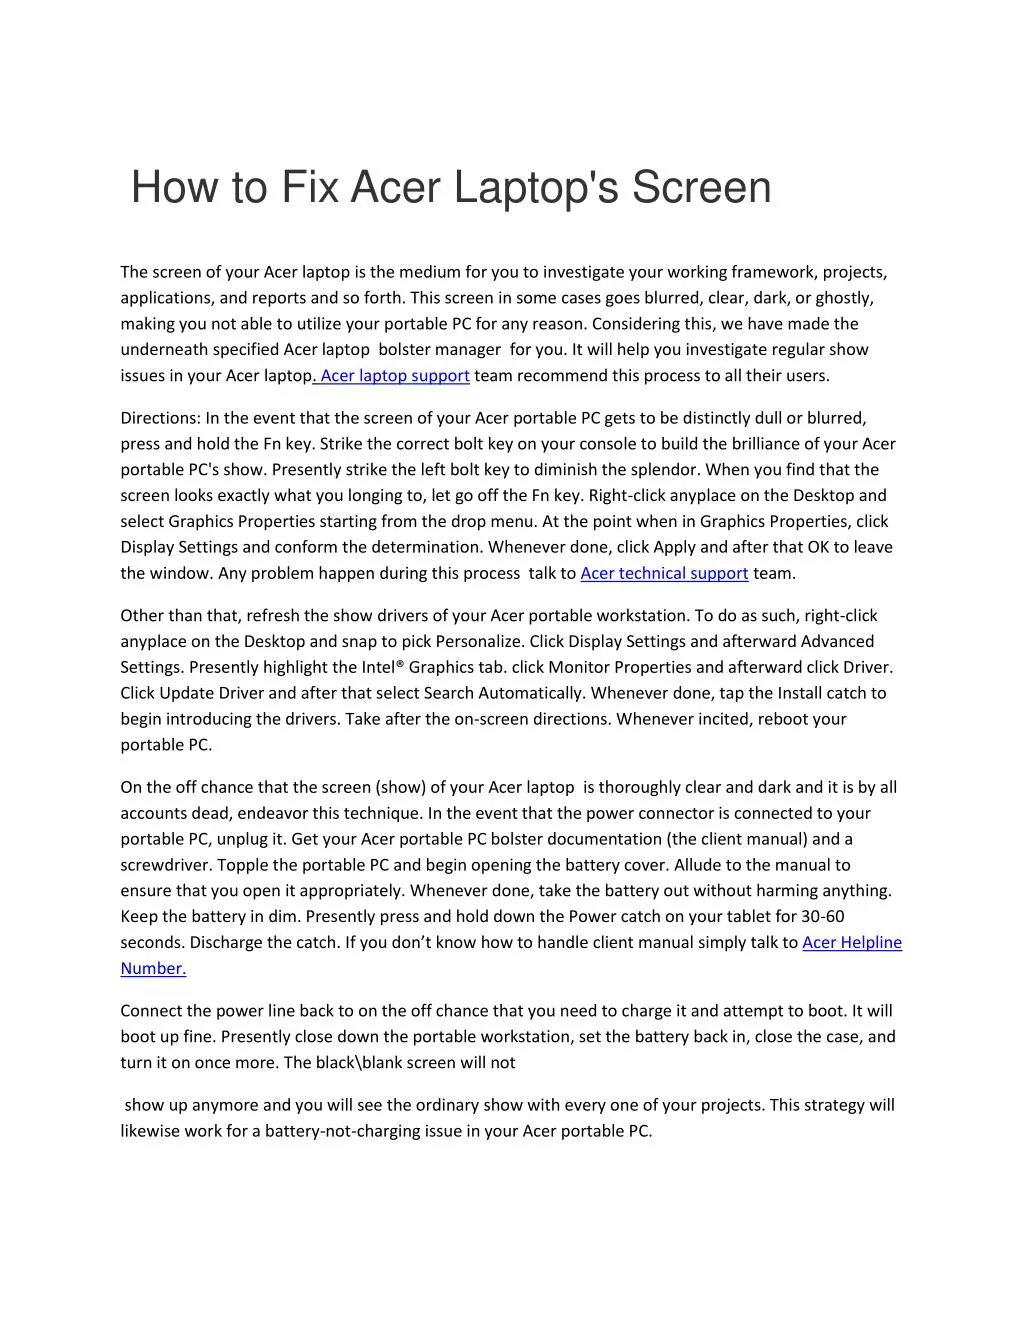 how to fix acer laptop s screen